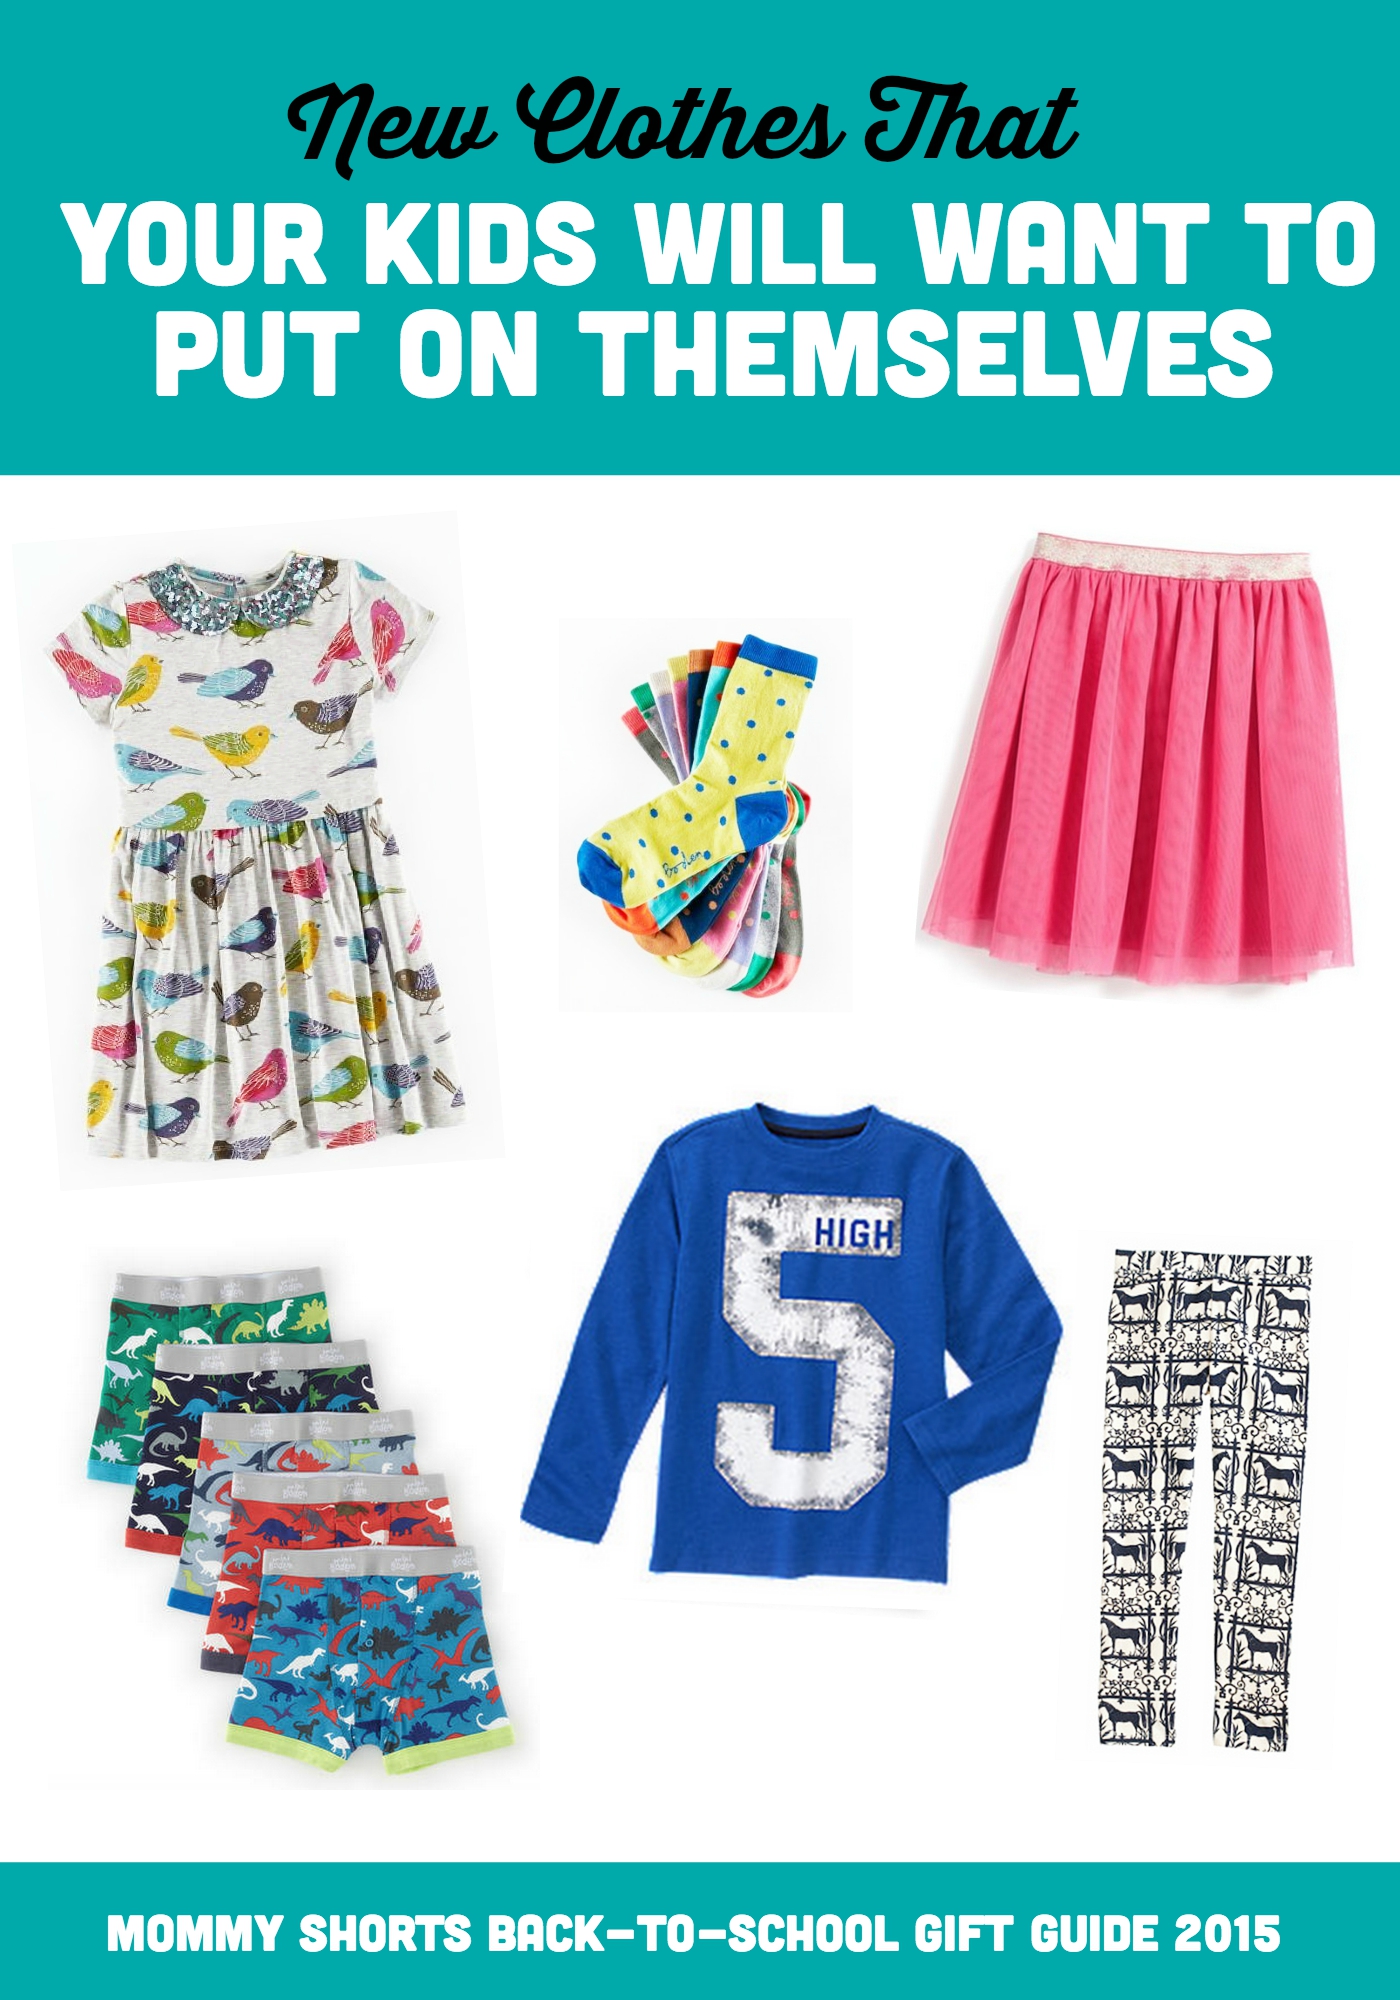 New ClothesThat Your kids will wnat to put on themselves